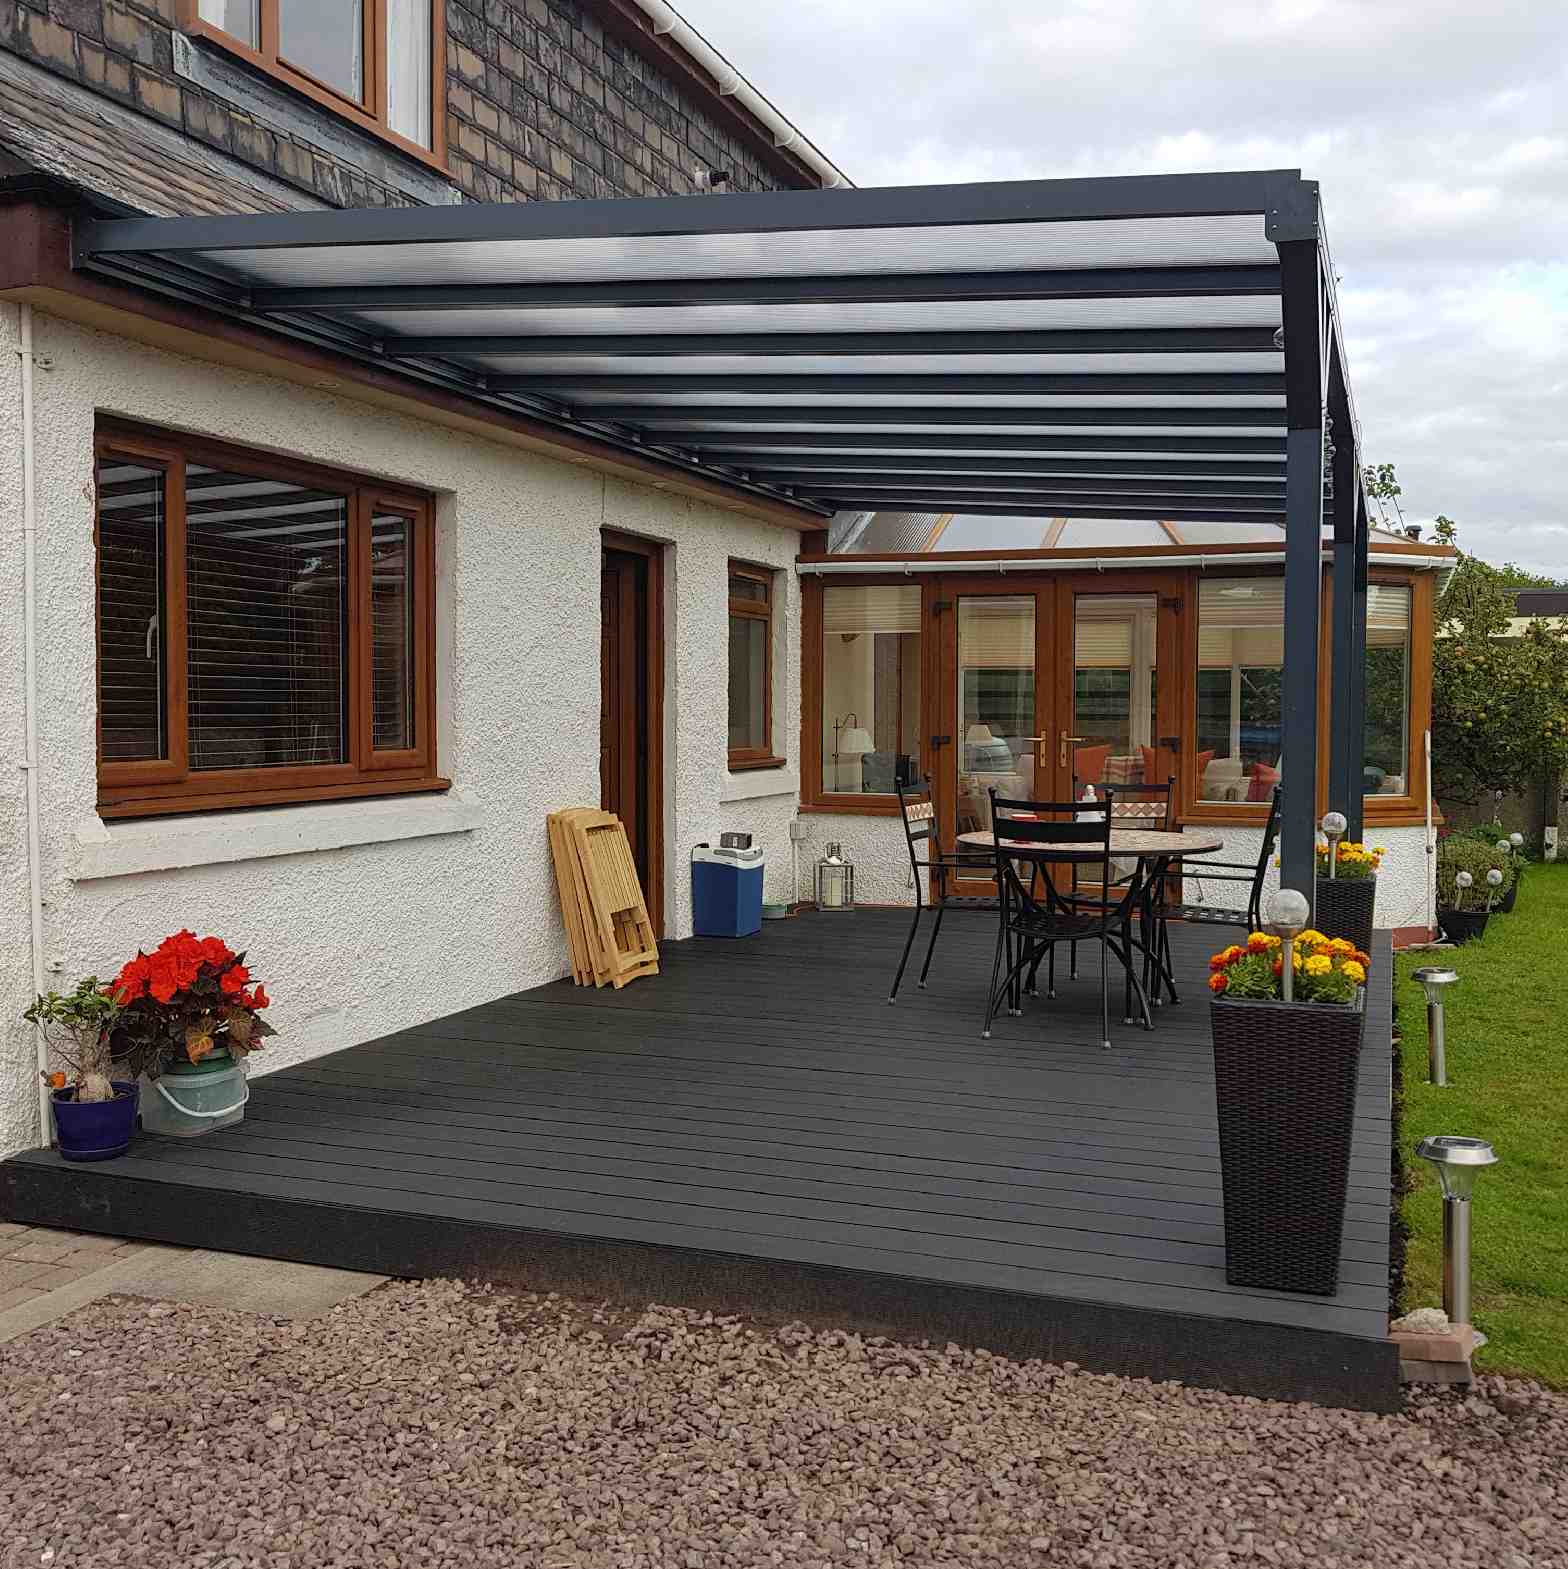 Buy Omega Verandah, Anthracite Grey, 16mm Polycarbonate Glazing - 10.6m (W) x 2.0m (P), (5) Supporting Posts online today